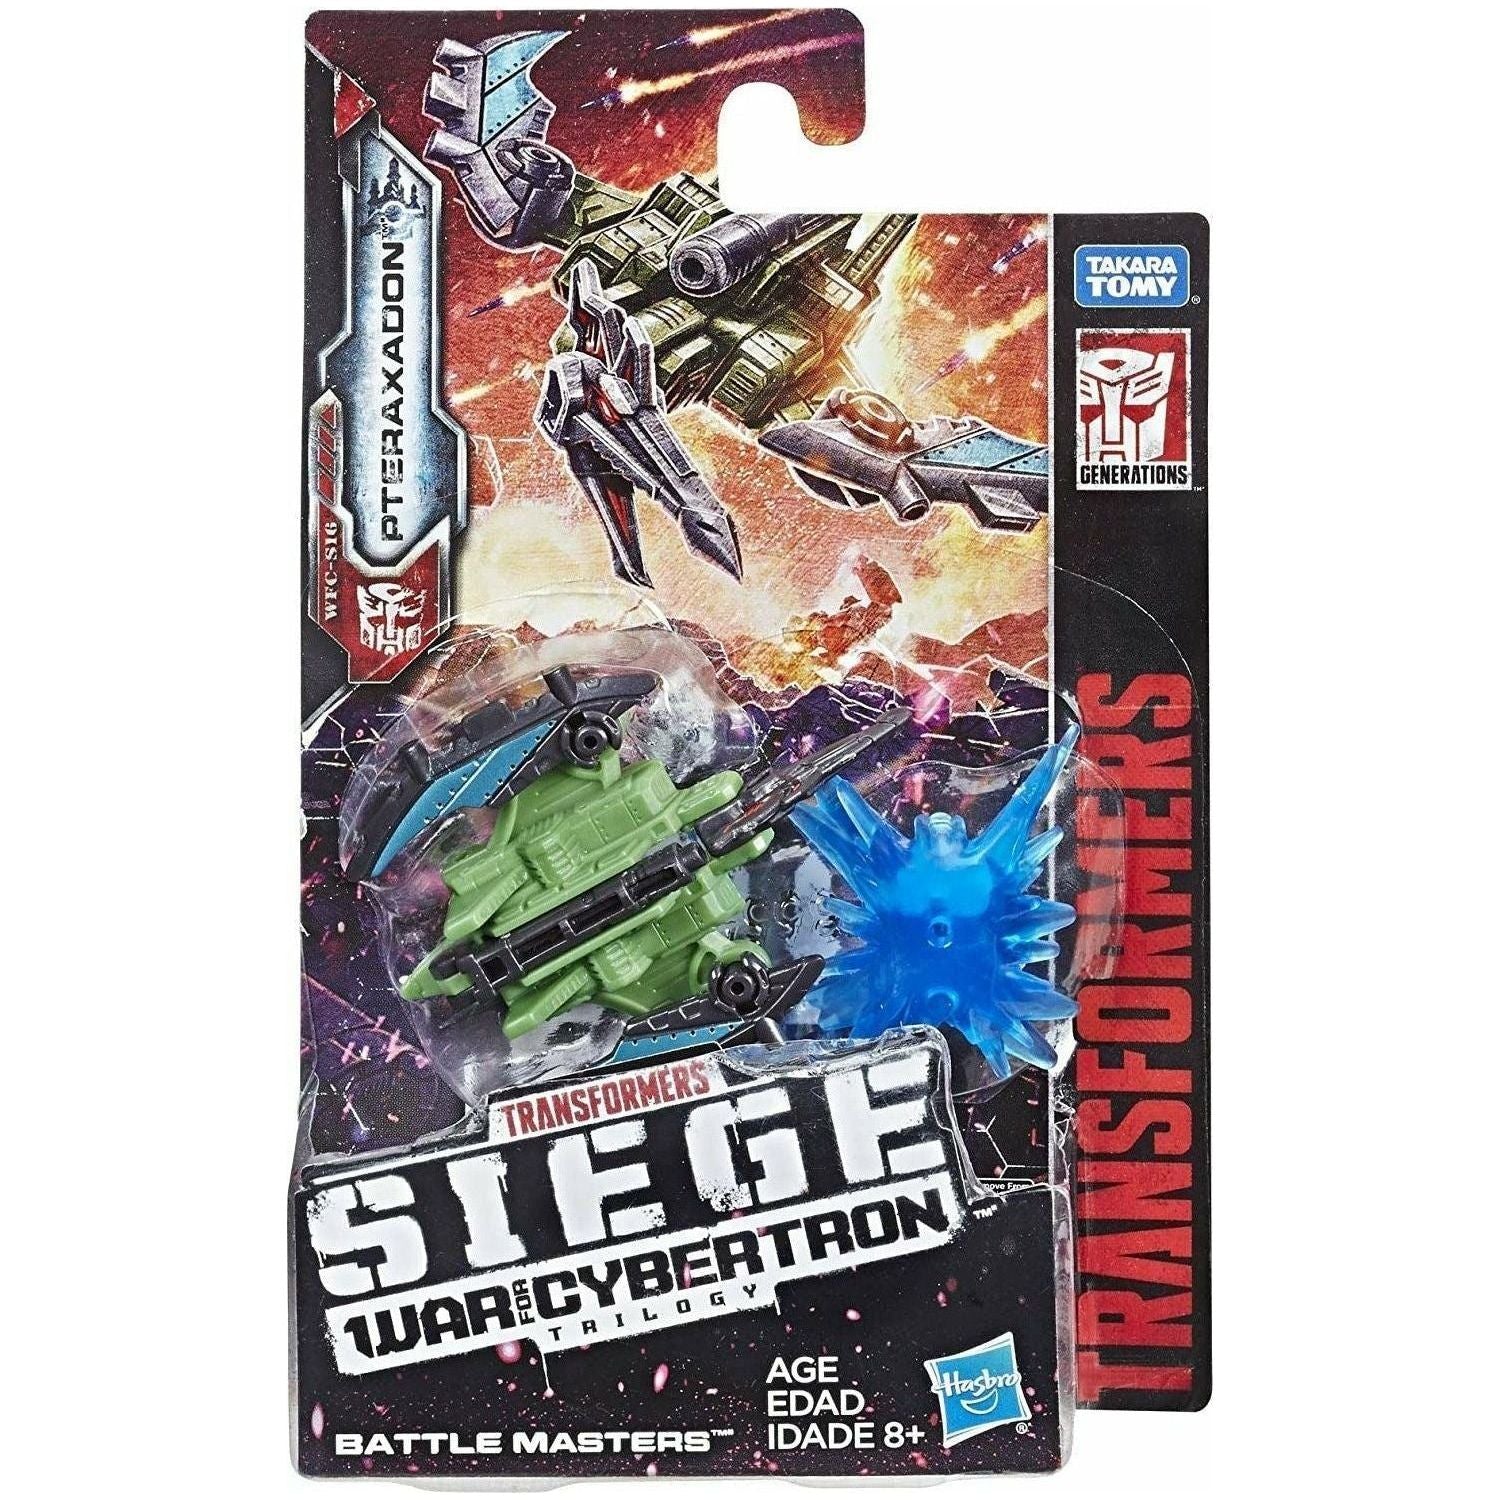 Transformers Toy Generations War for Cybertron: Siege Battle Masters Wfc-S16 Pteraxadon Action Figure - BumbleToys - 8+ Years, Boys, Figures, OXE, Transformers